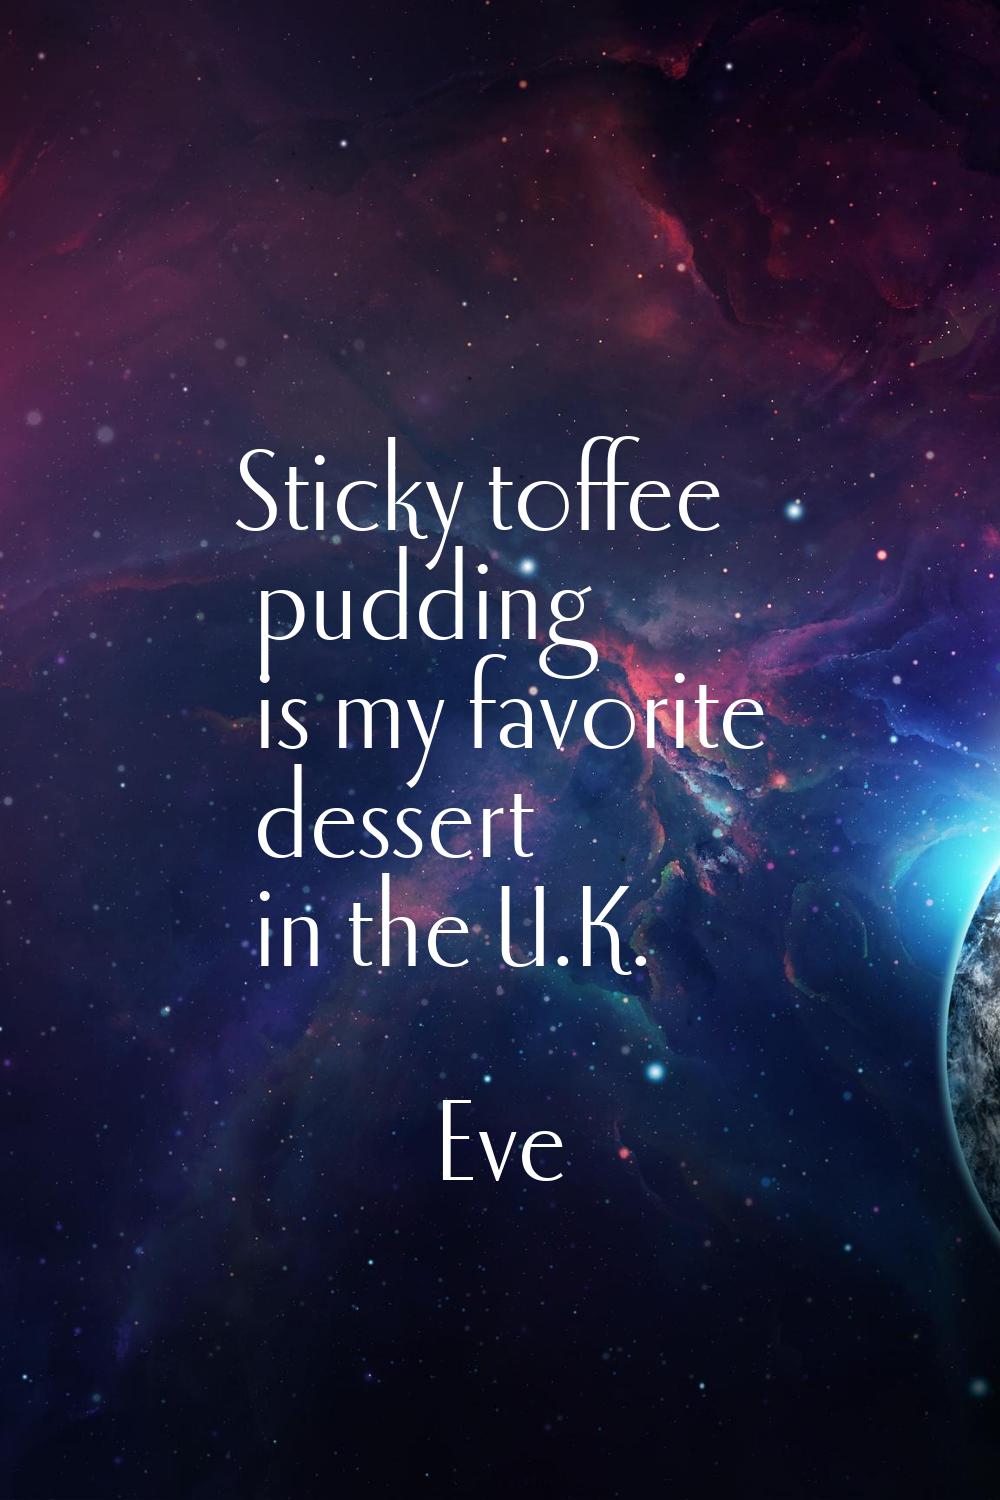 Sticky toffee pudding is my favorite dessert in the U.K.